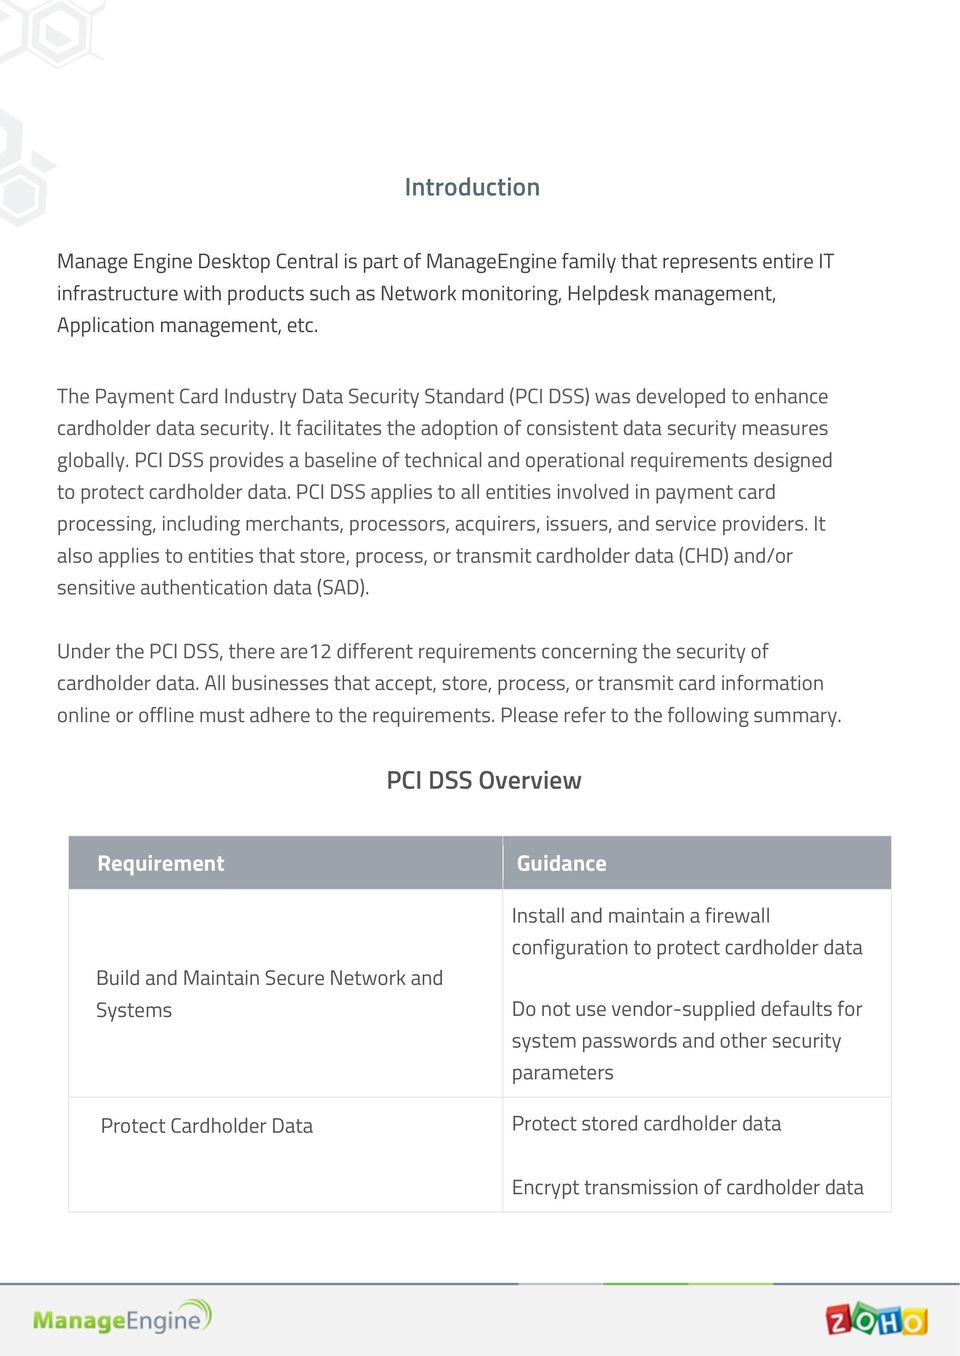 It facilitates the adoption of consistent data security measures globally. PCI DSS provides a baseline of technical and operational requirements designed to protect cardholder data.